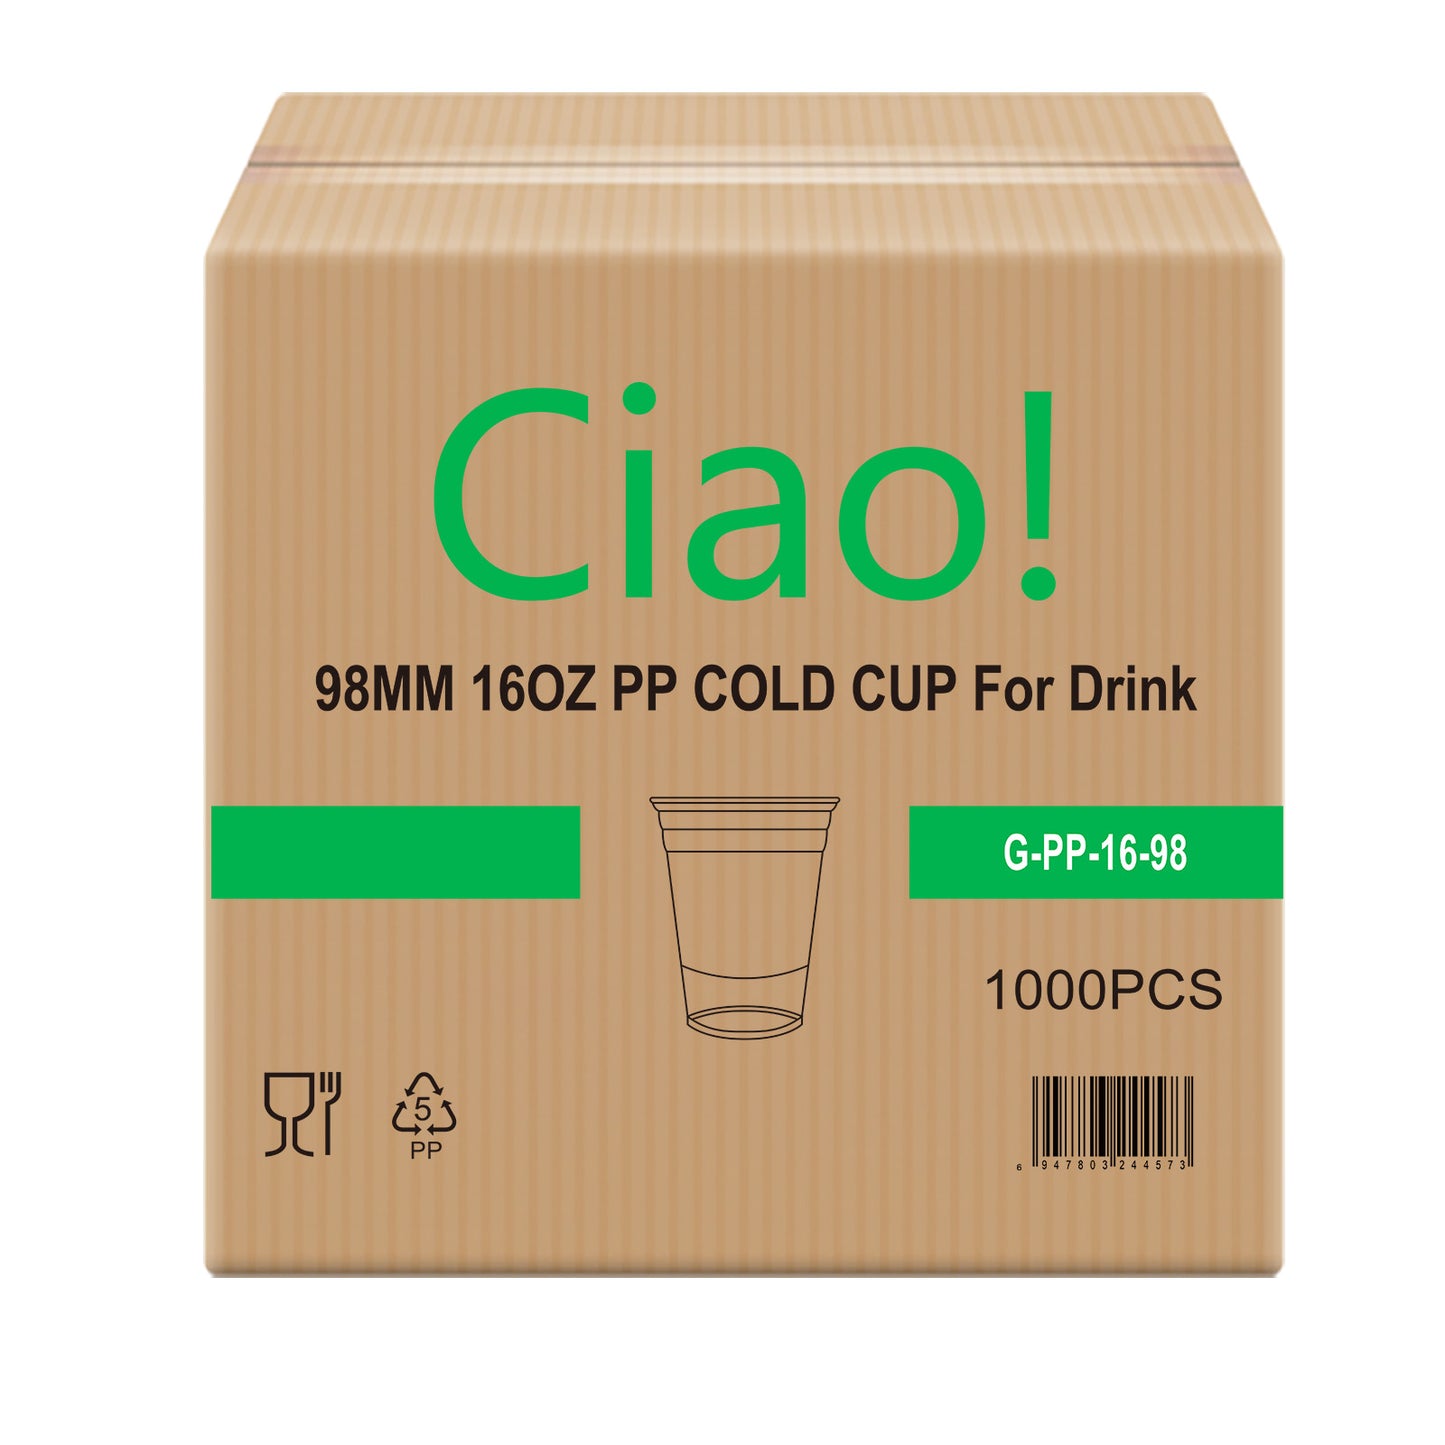 CIAO! 16OZ PP Plastic Cold Drink Cup, Great for Smoothies, Iced Coffee, Boba and Cold Drinks, 98mm (Case of 1,000)